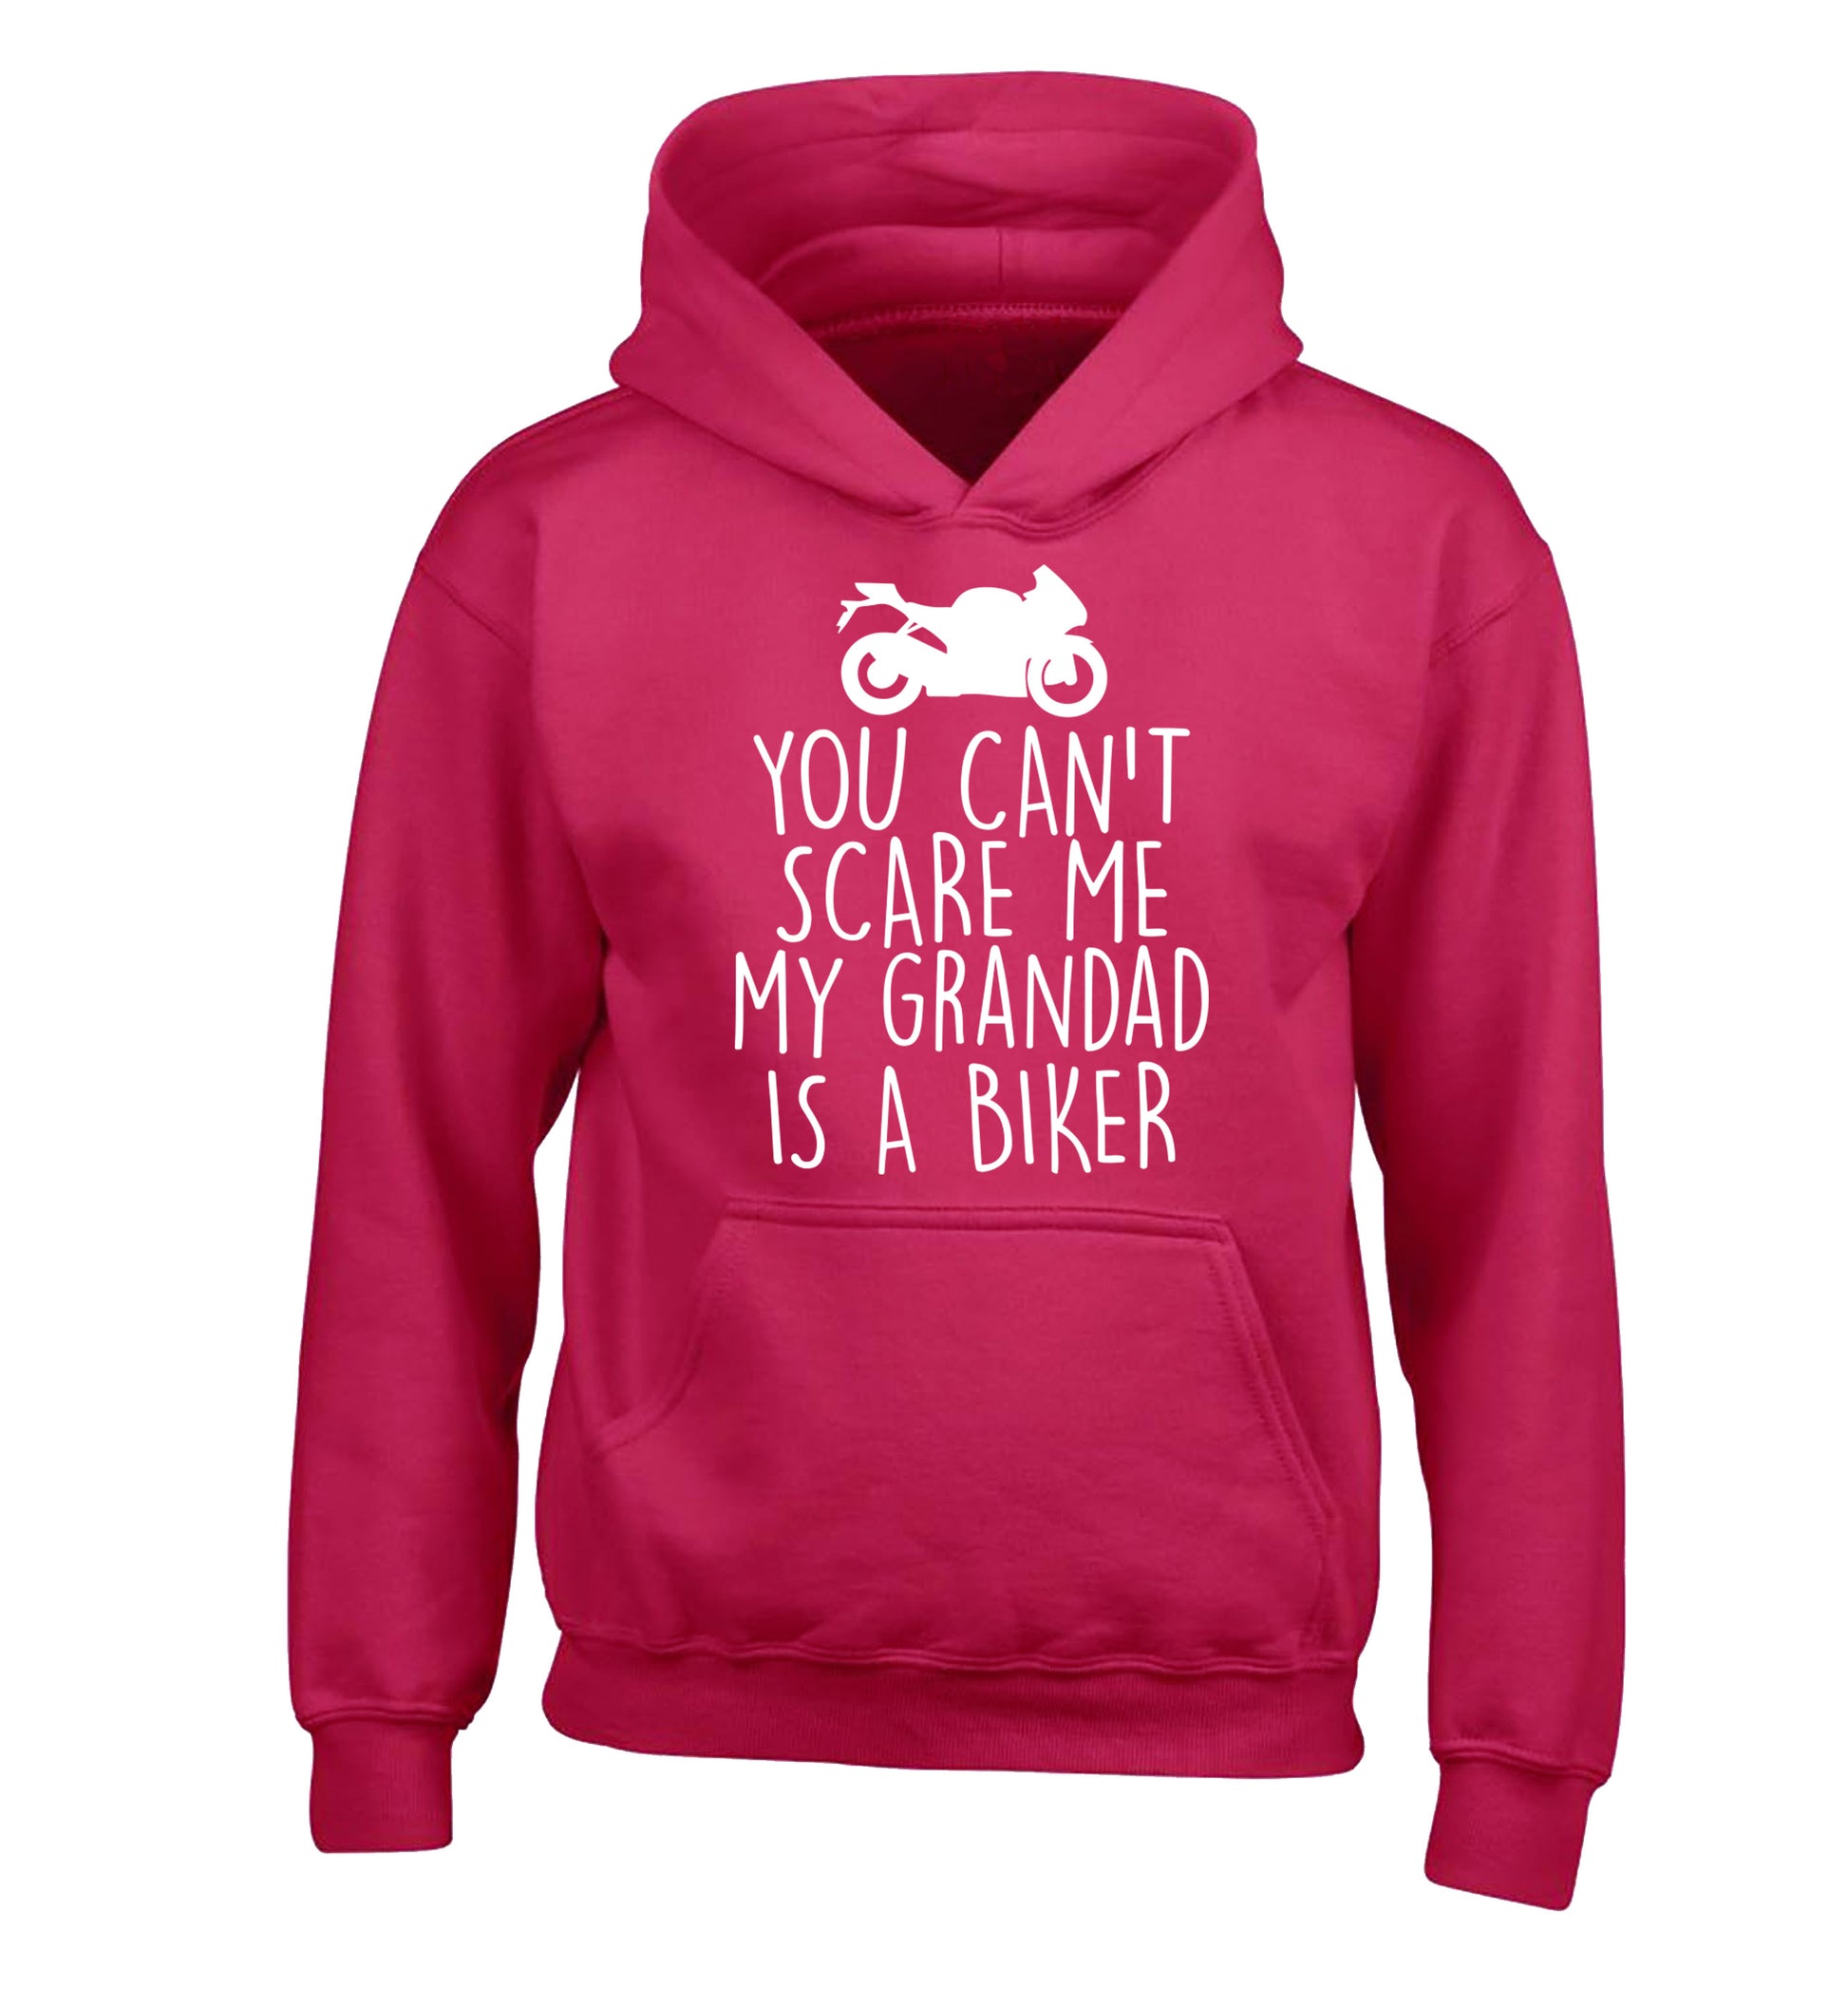 You can't scare me my grandad is a biker children's pink hoodie 12-13 Years